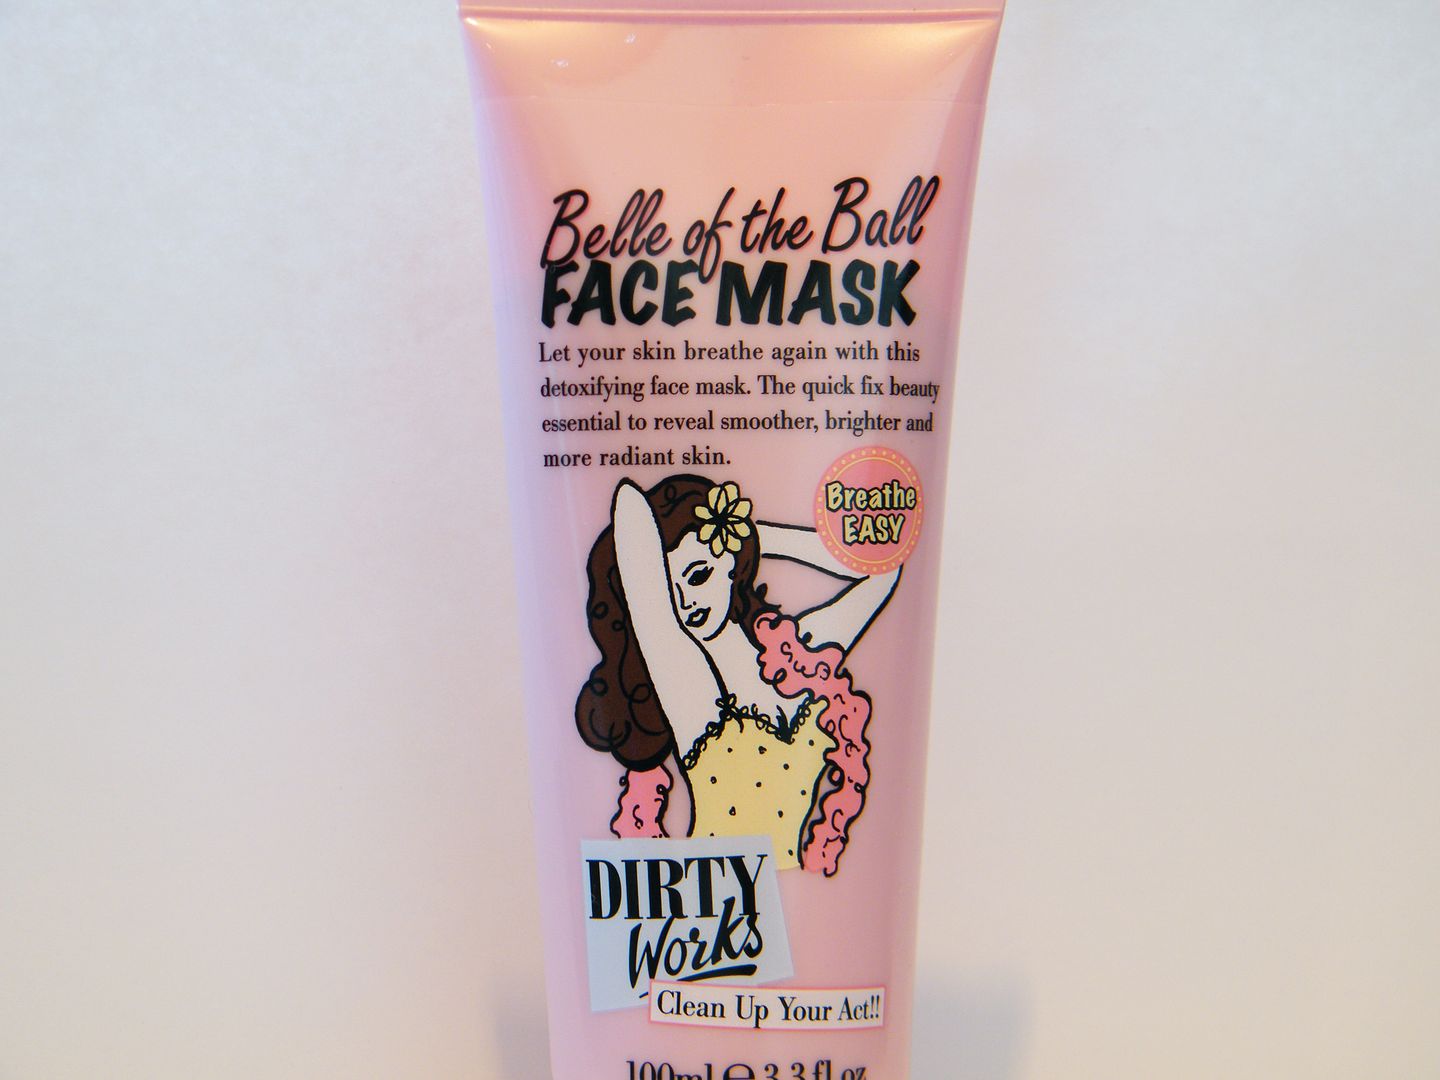 Dirty Works Belle of the Ball Face Mask